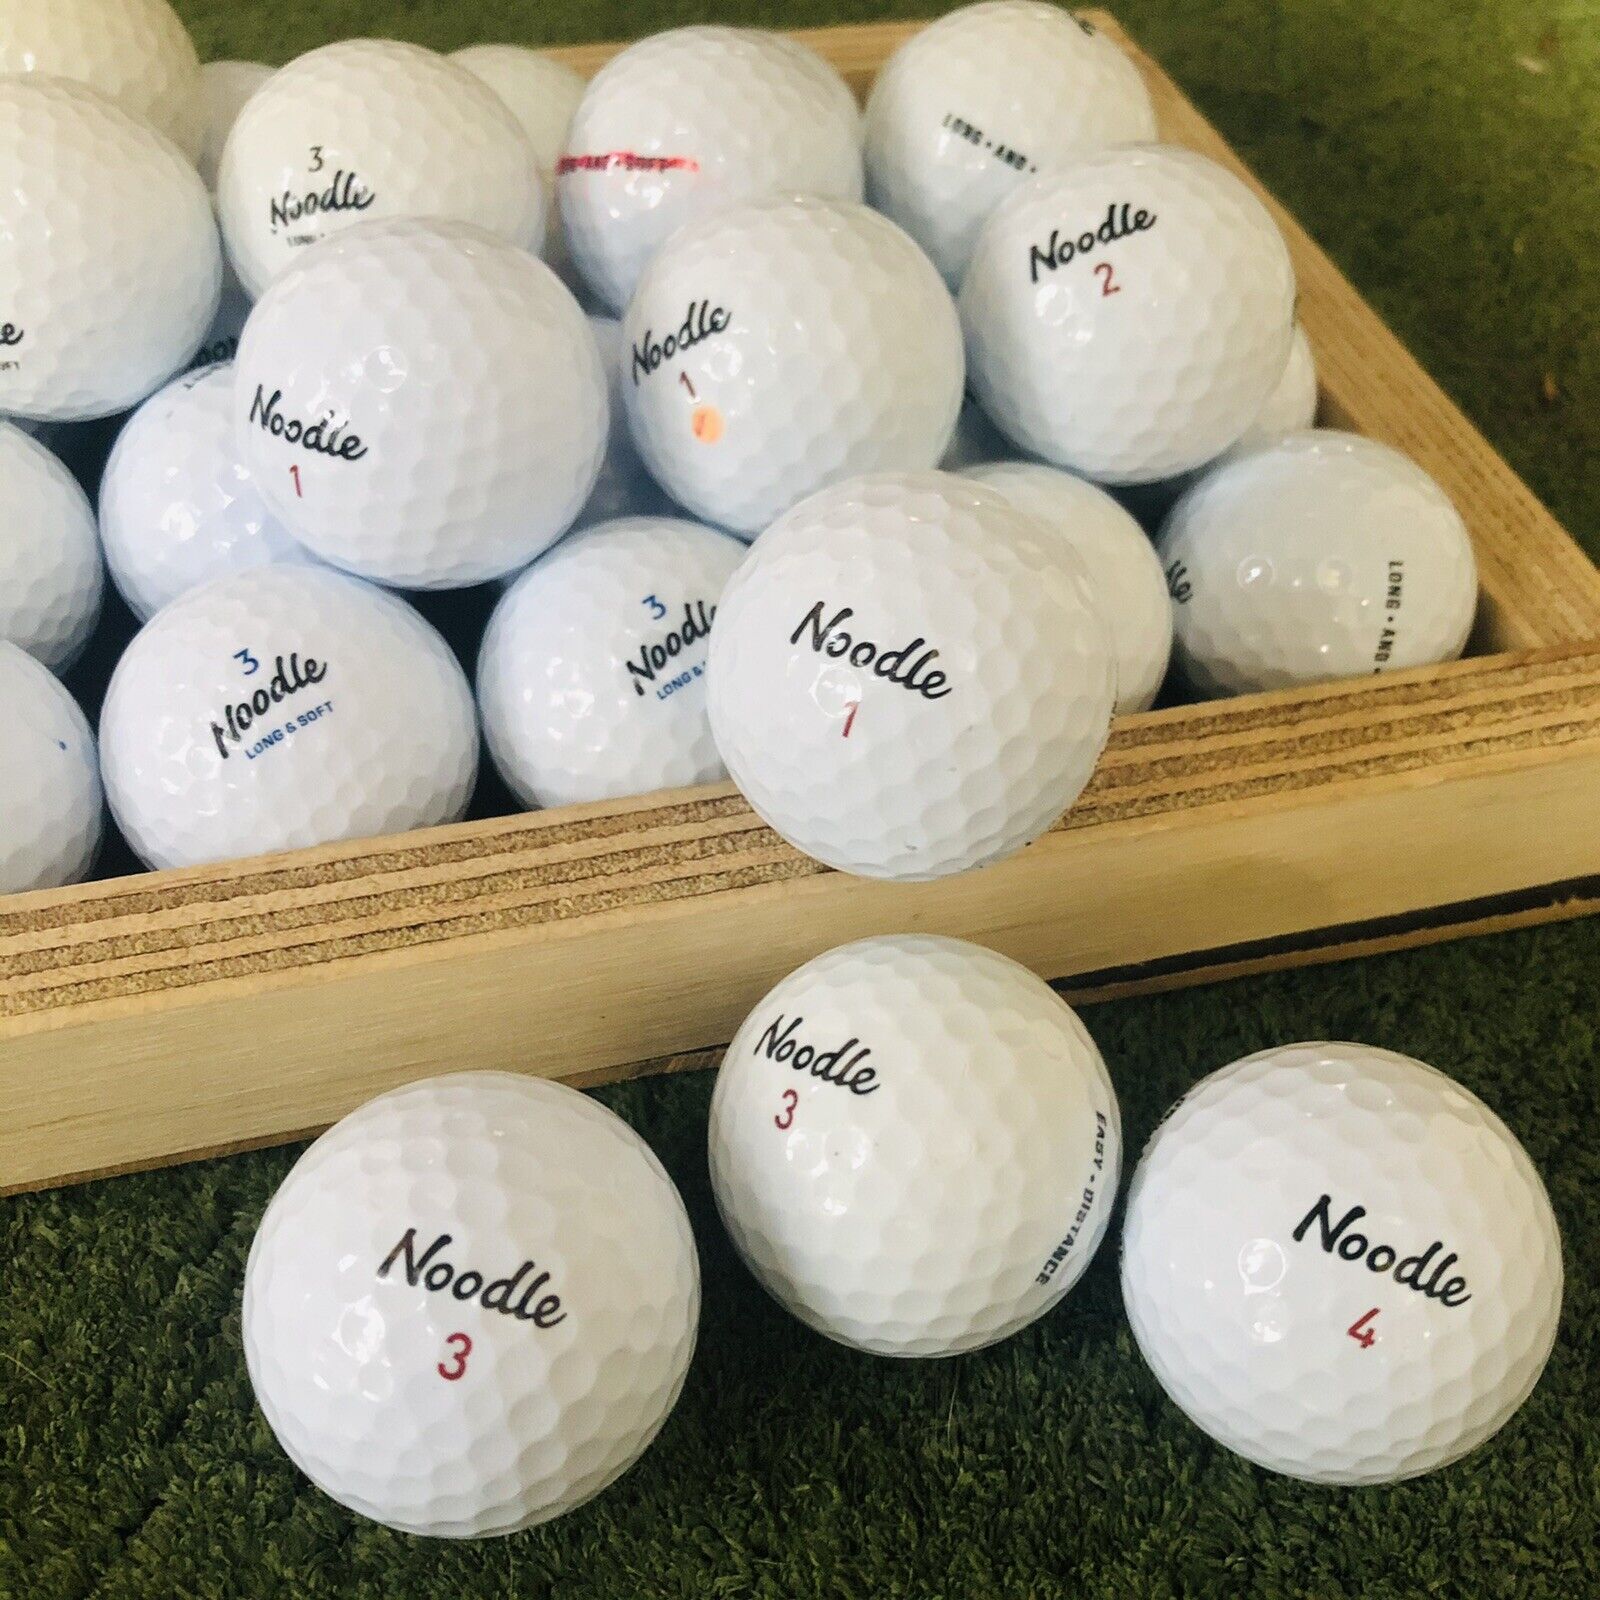 50 Near Mint Noodle 5A/4A Used Golf Ball mixed model